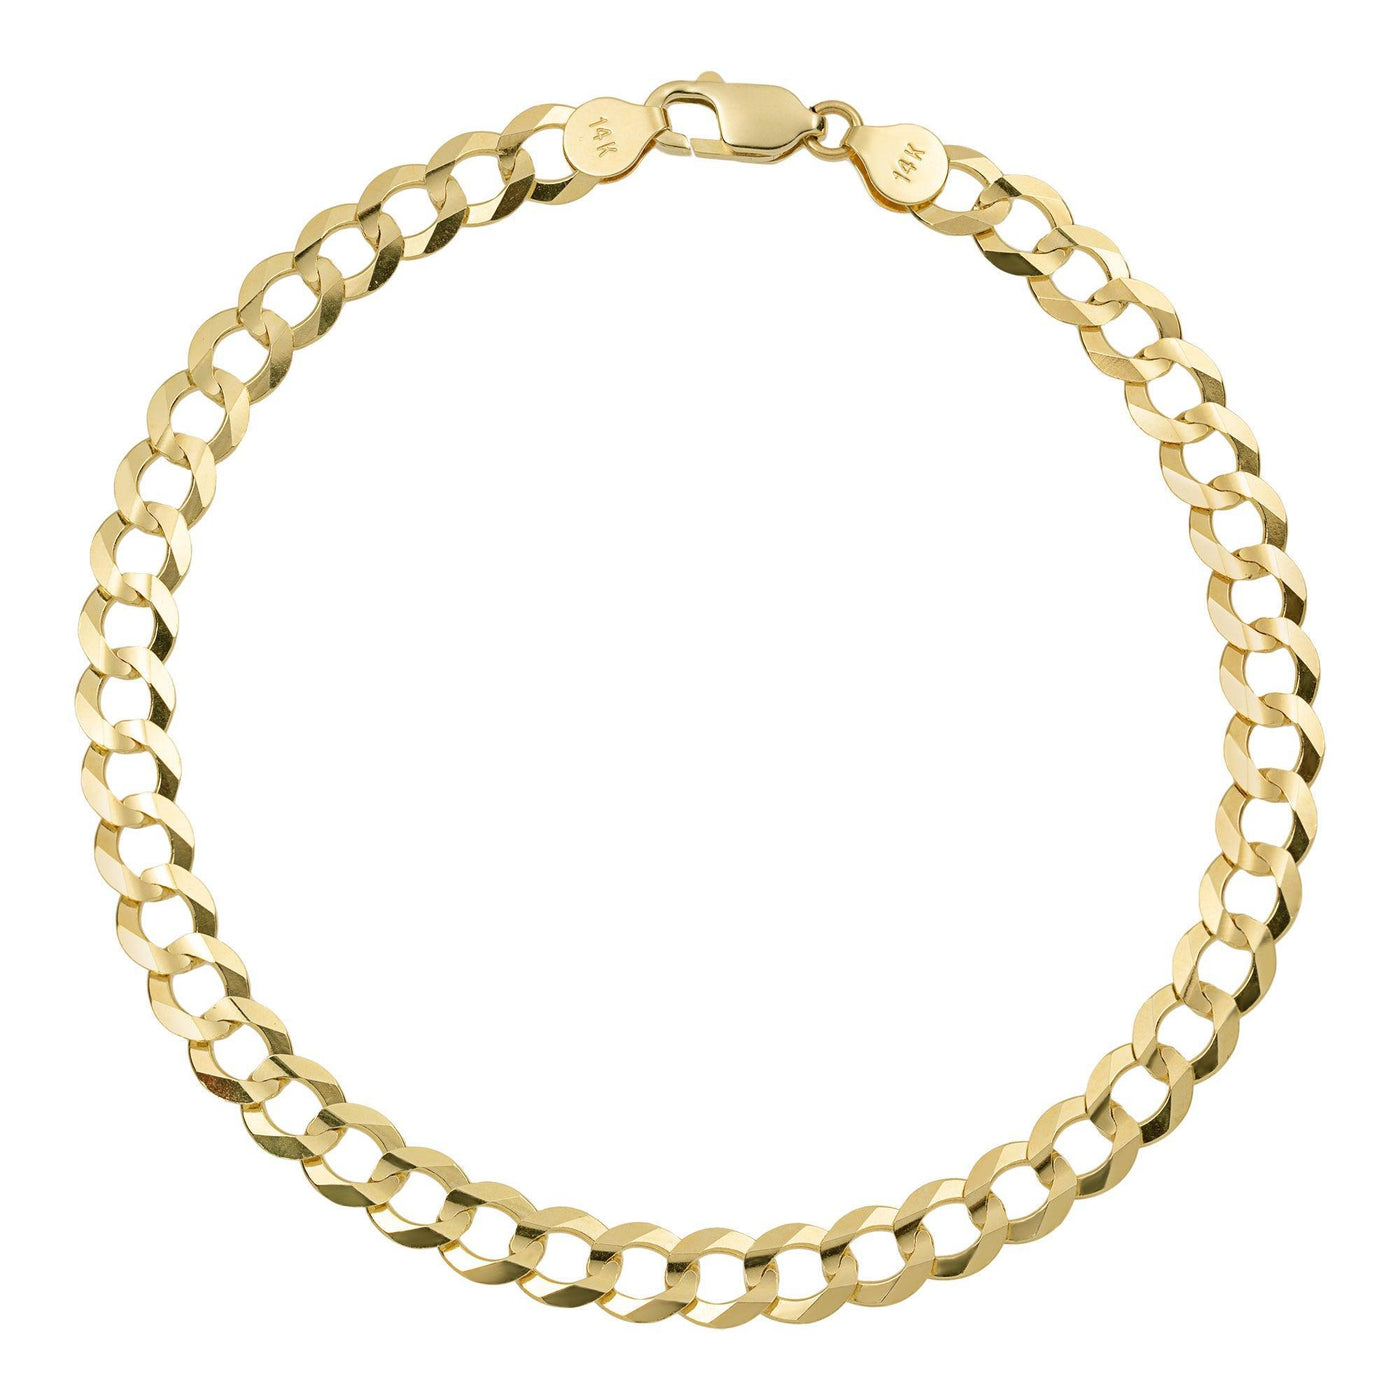 Miami Curb Link Anklet 14K Yellow Gold - bayamjewelry